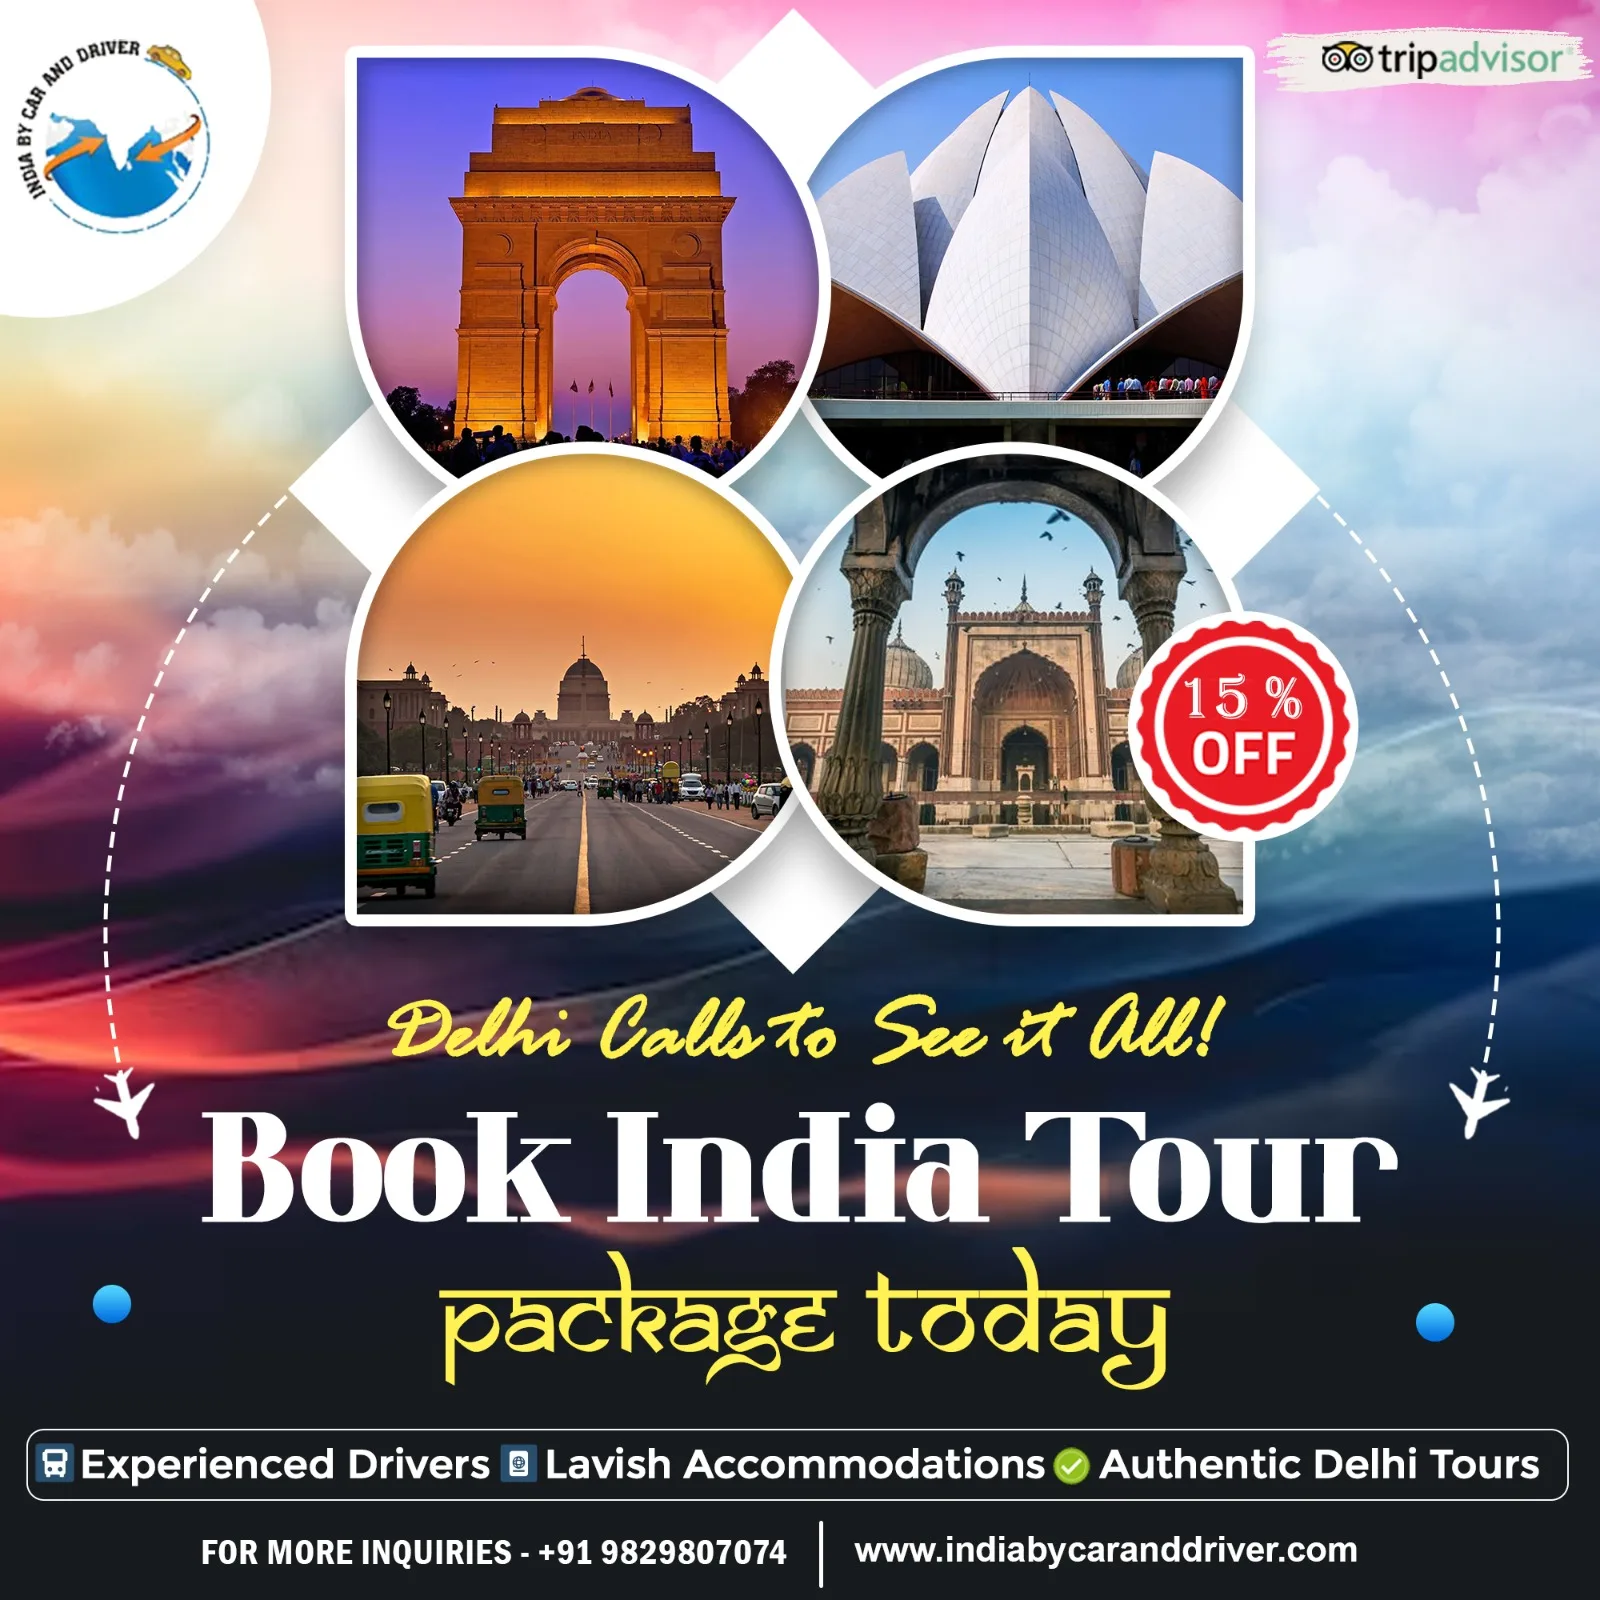 How to Book Delhi Tour Packages with Best India Tour Operator